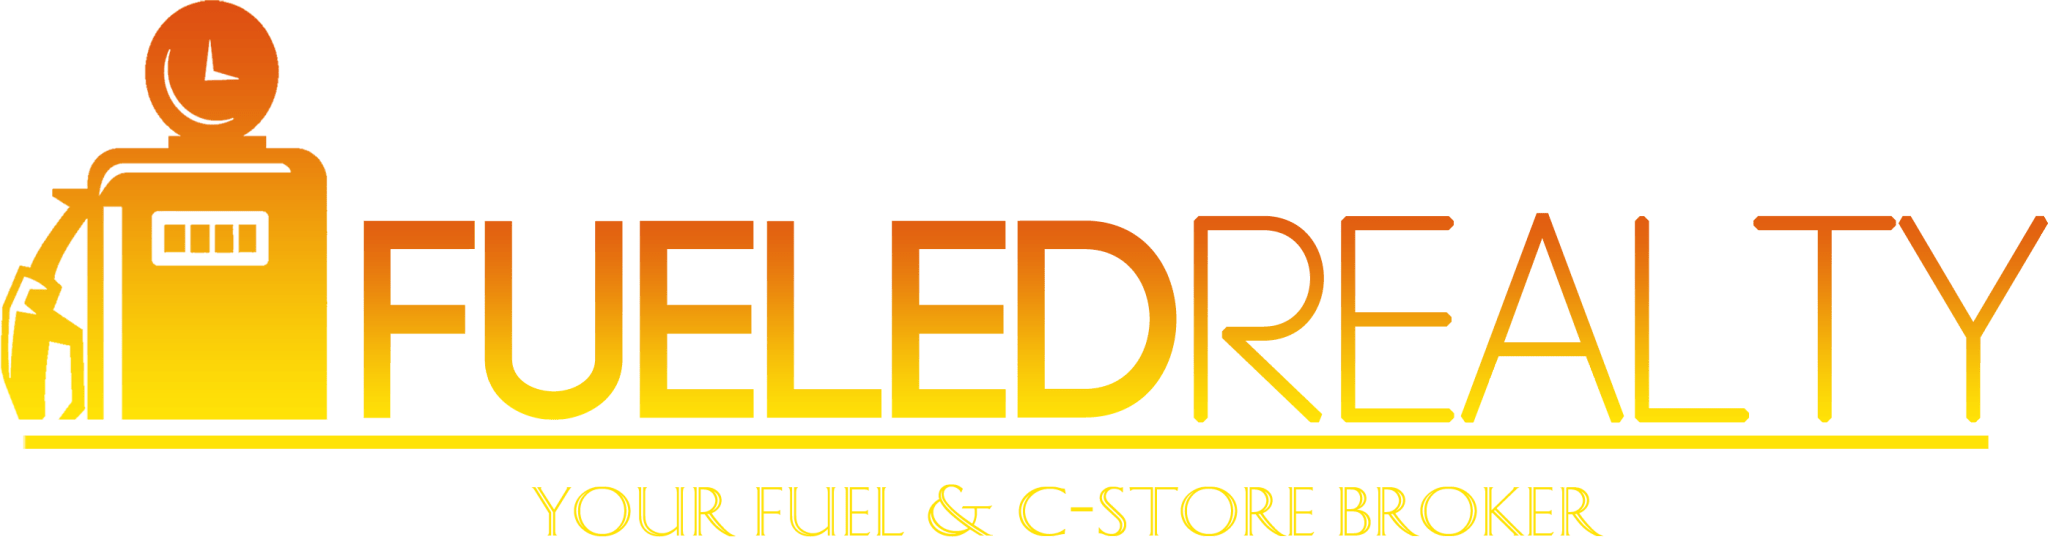 Fueled Realty